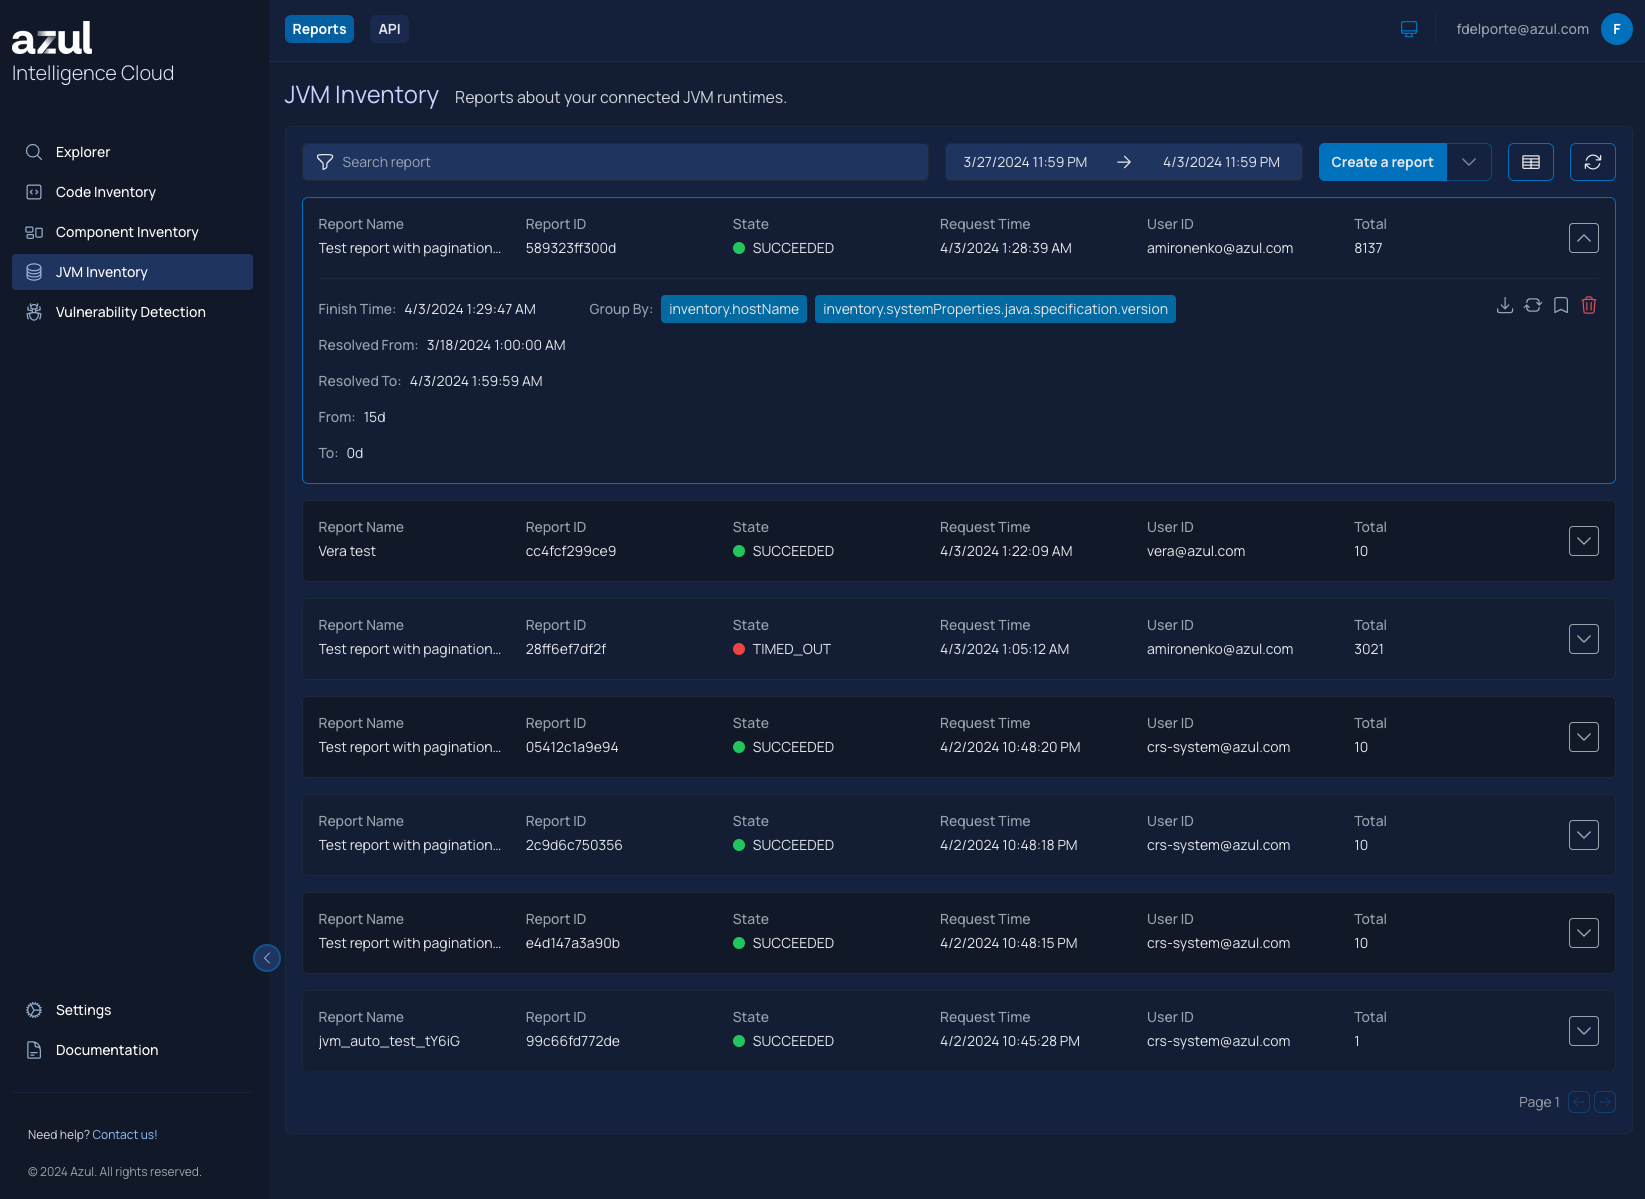 Example of a JVM Inventory view in the Azul Intelligence Cloud UI